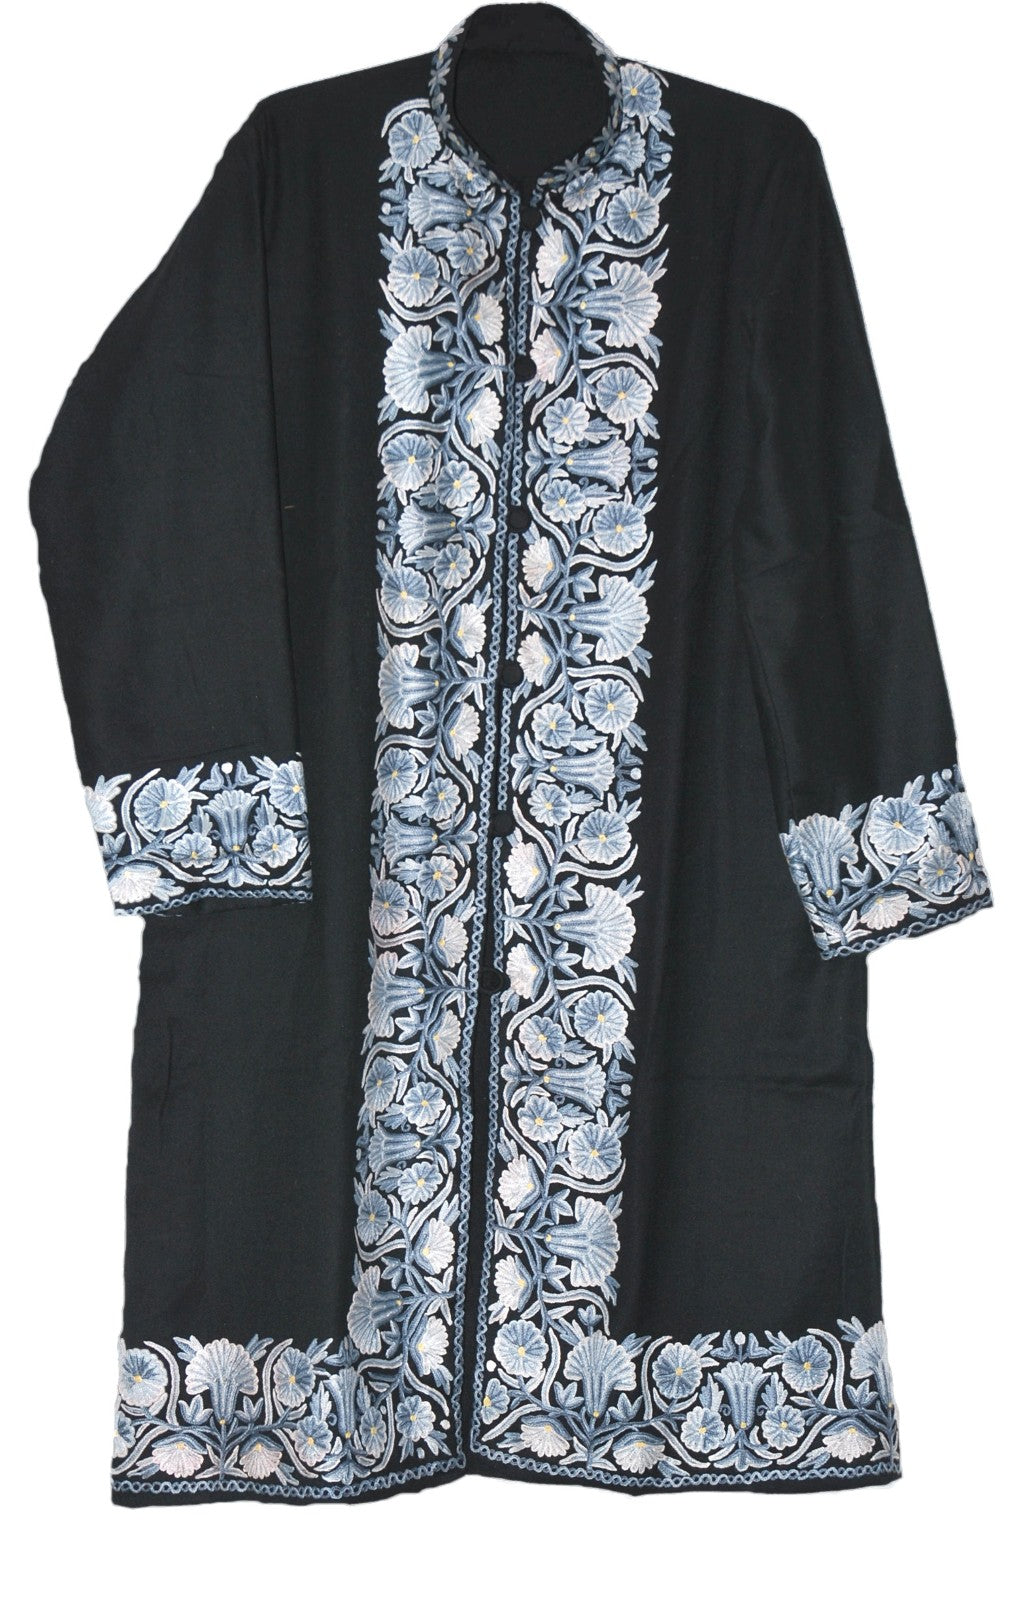 Woolen Coat Long Jacket Black, Grey and White Embroidery #BD-124